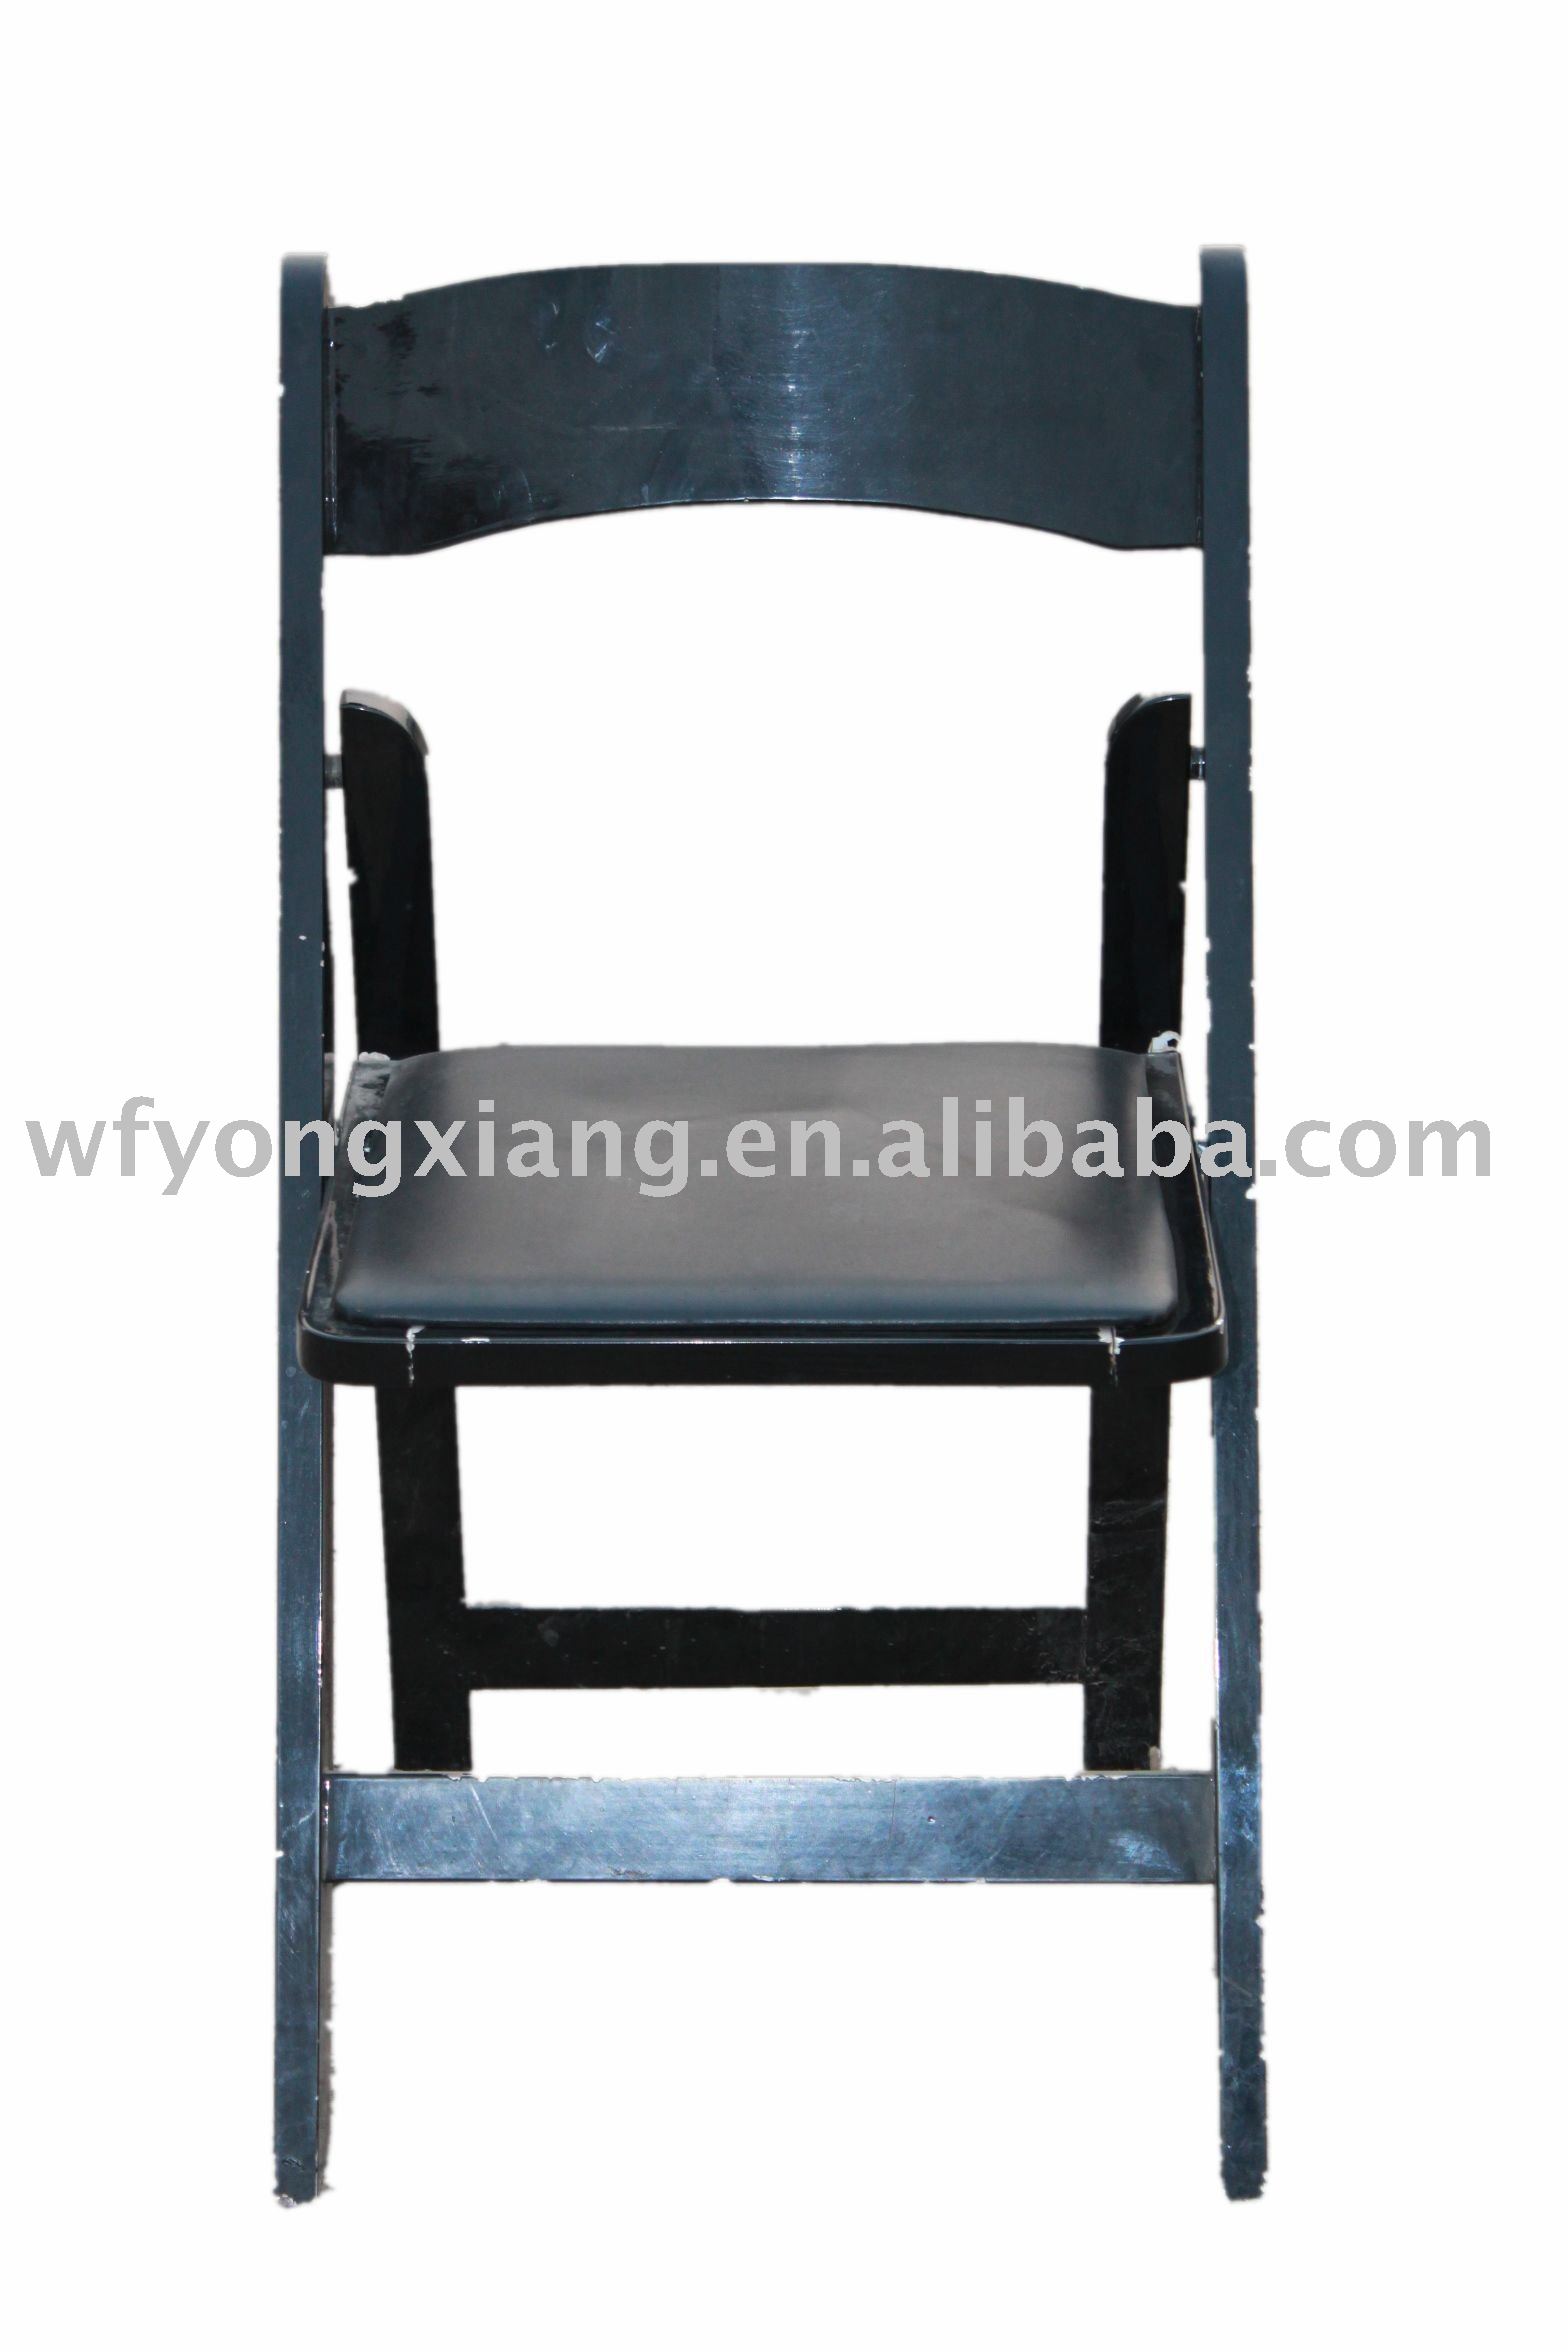 chiavari chair 1durable structure 2clear ring and uniform curve 3smooth